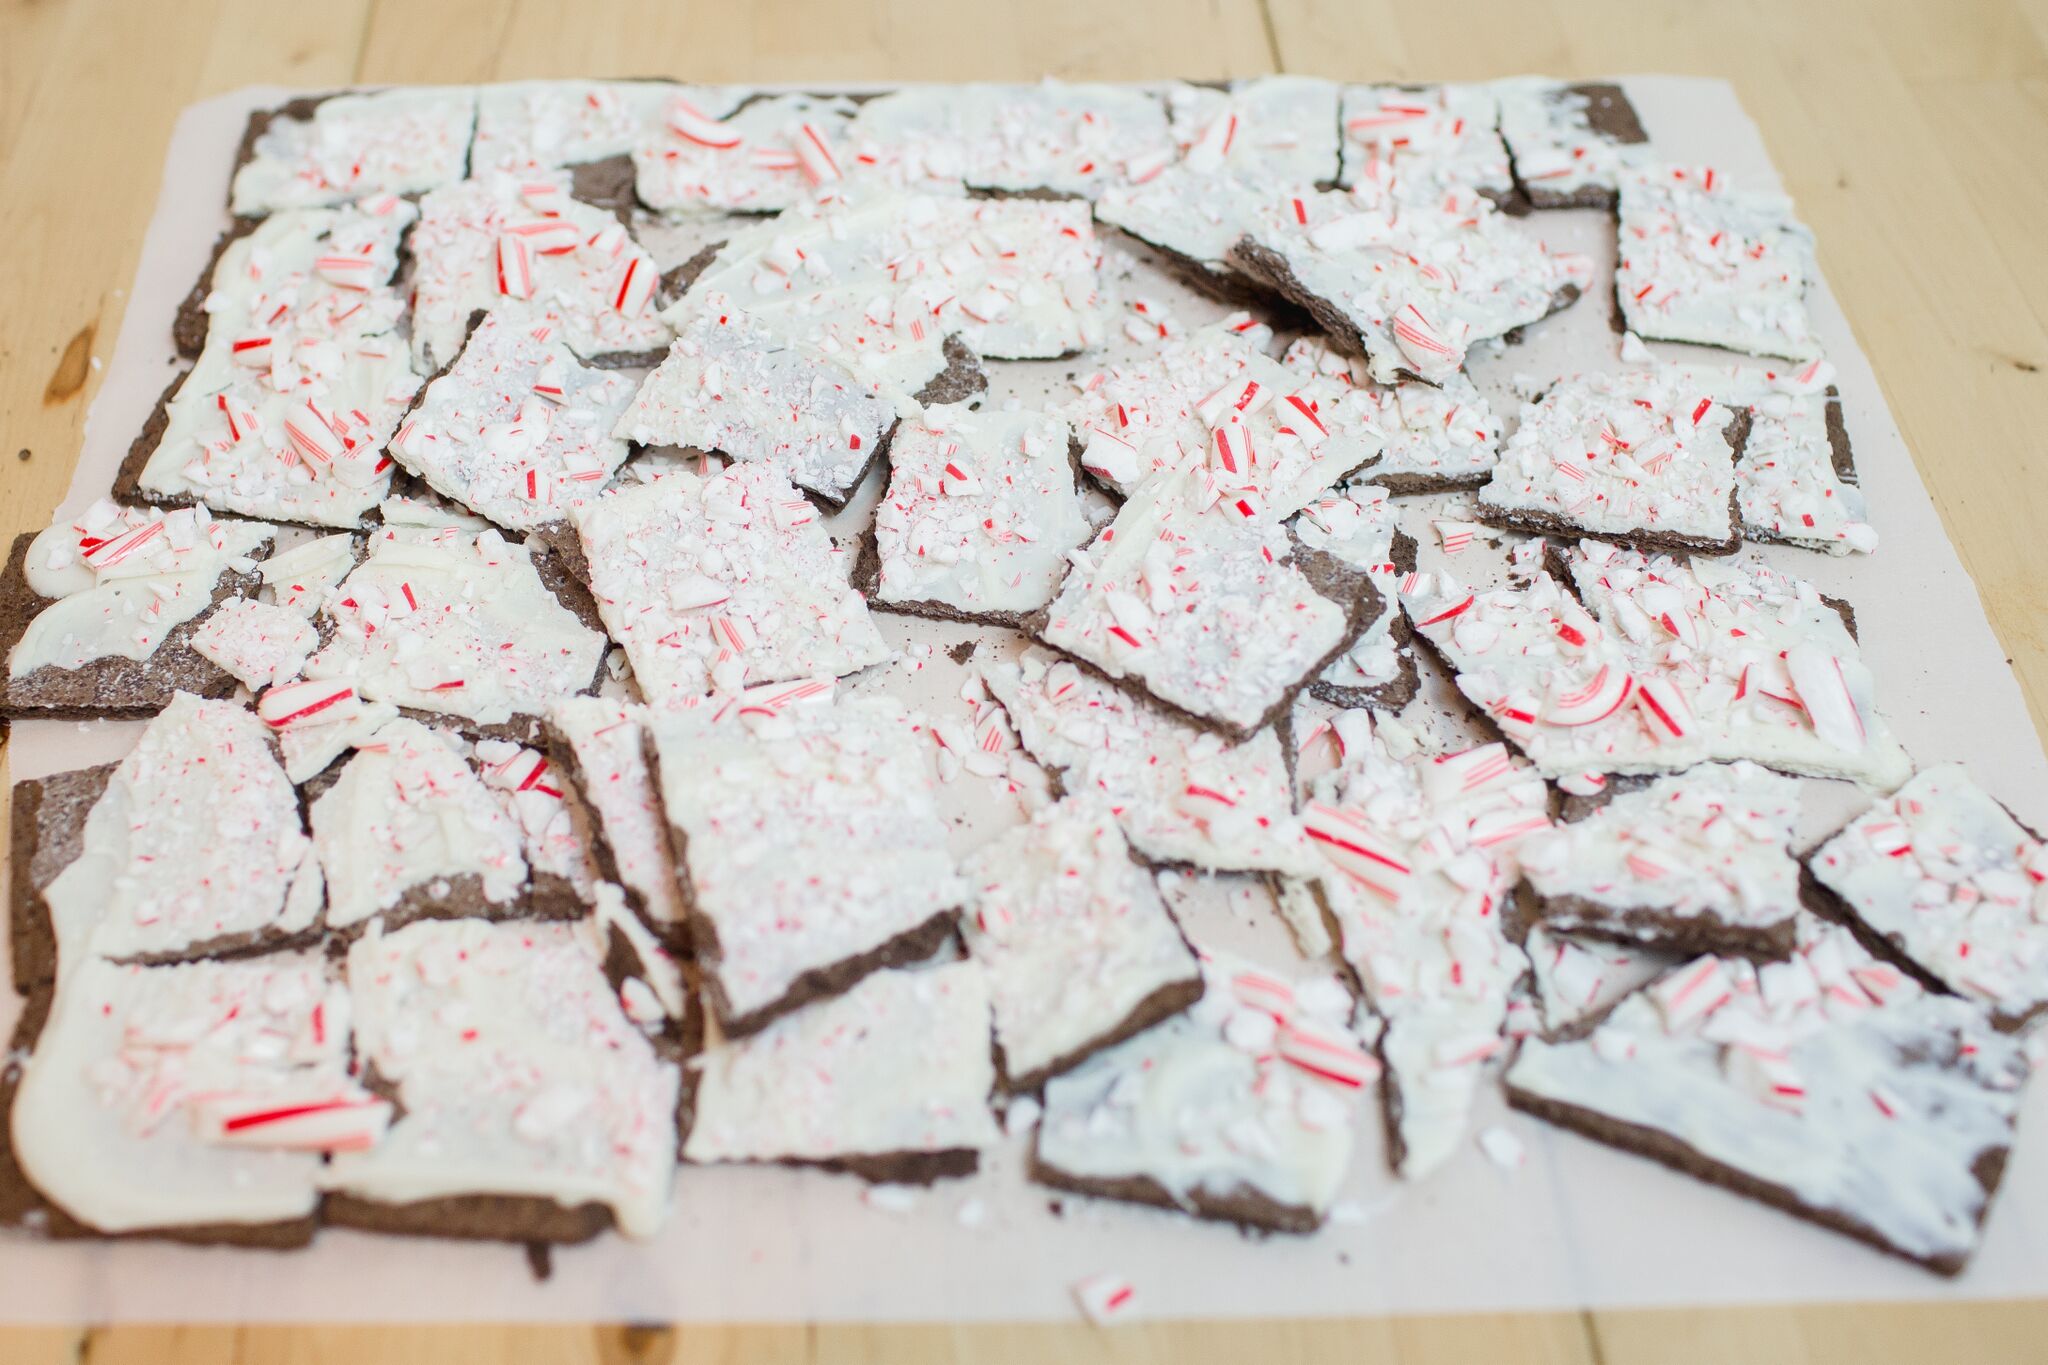 Looking for the perfect holiday recipe? This delicious semi-homemade peppermint bark comes together in as little as 20 minutes and uses just 3 ingredients!